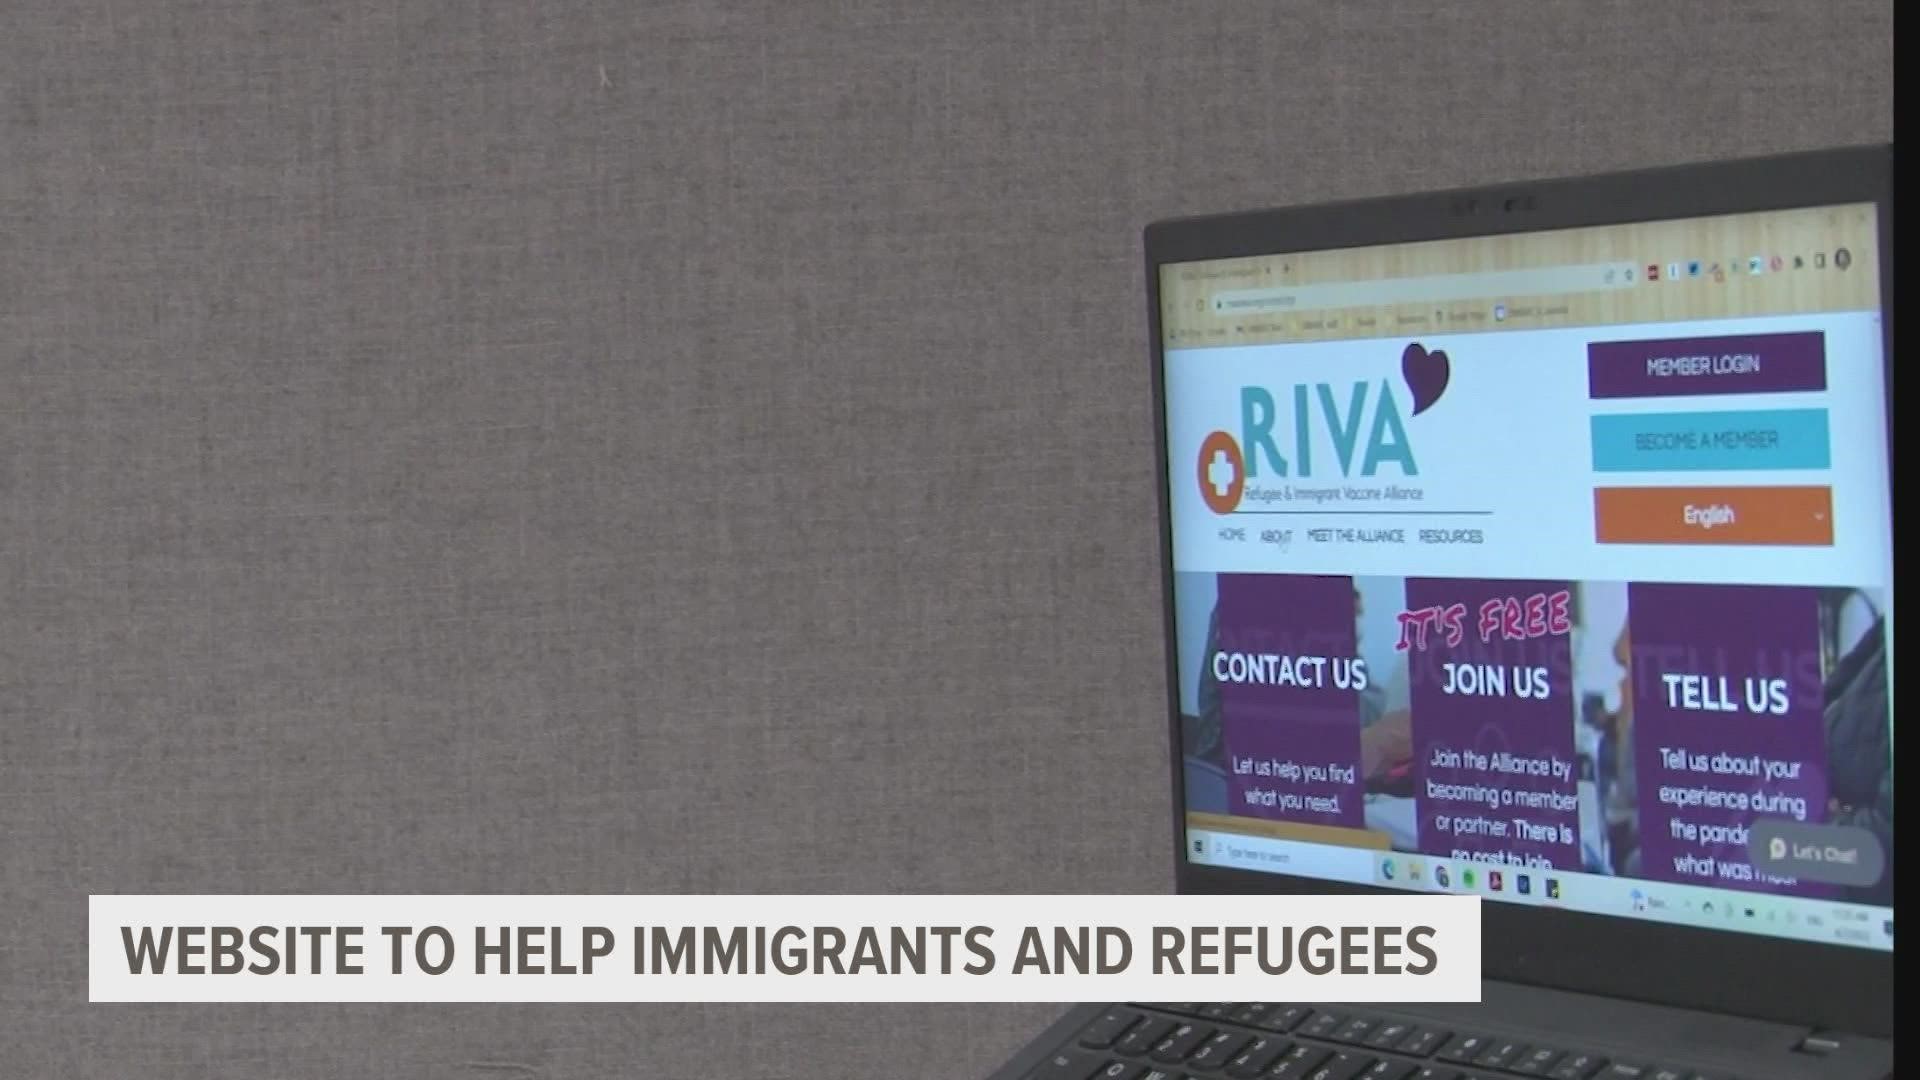 A new website is aimed at helping refugees and immigrants who move to Iowa, by putting the information they need to know in their language.